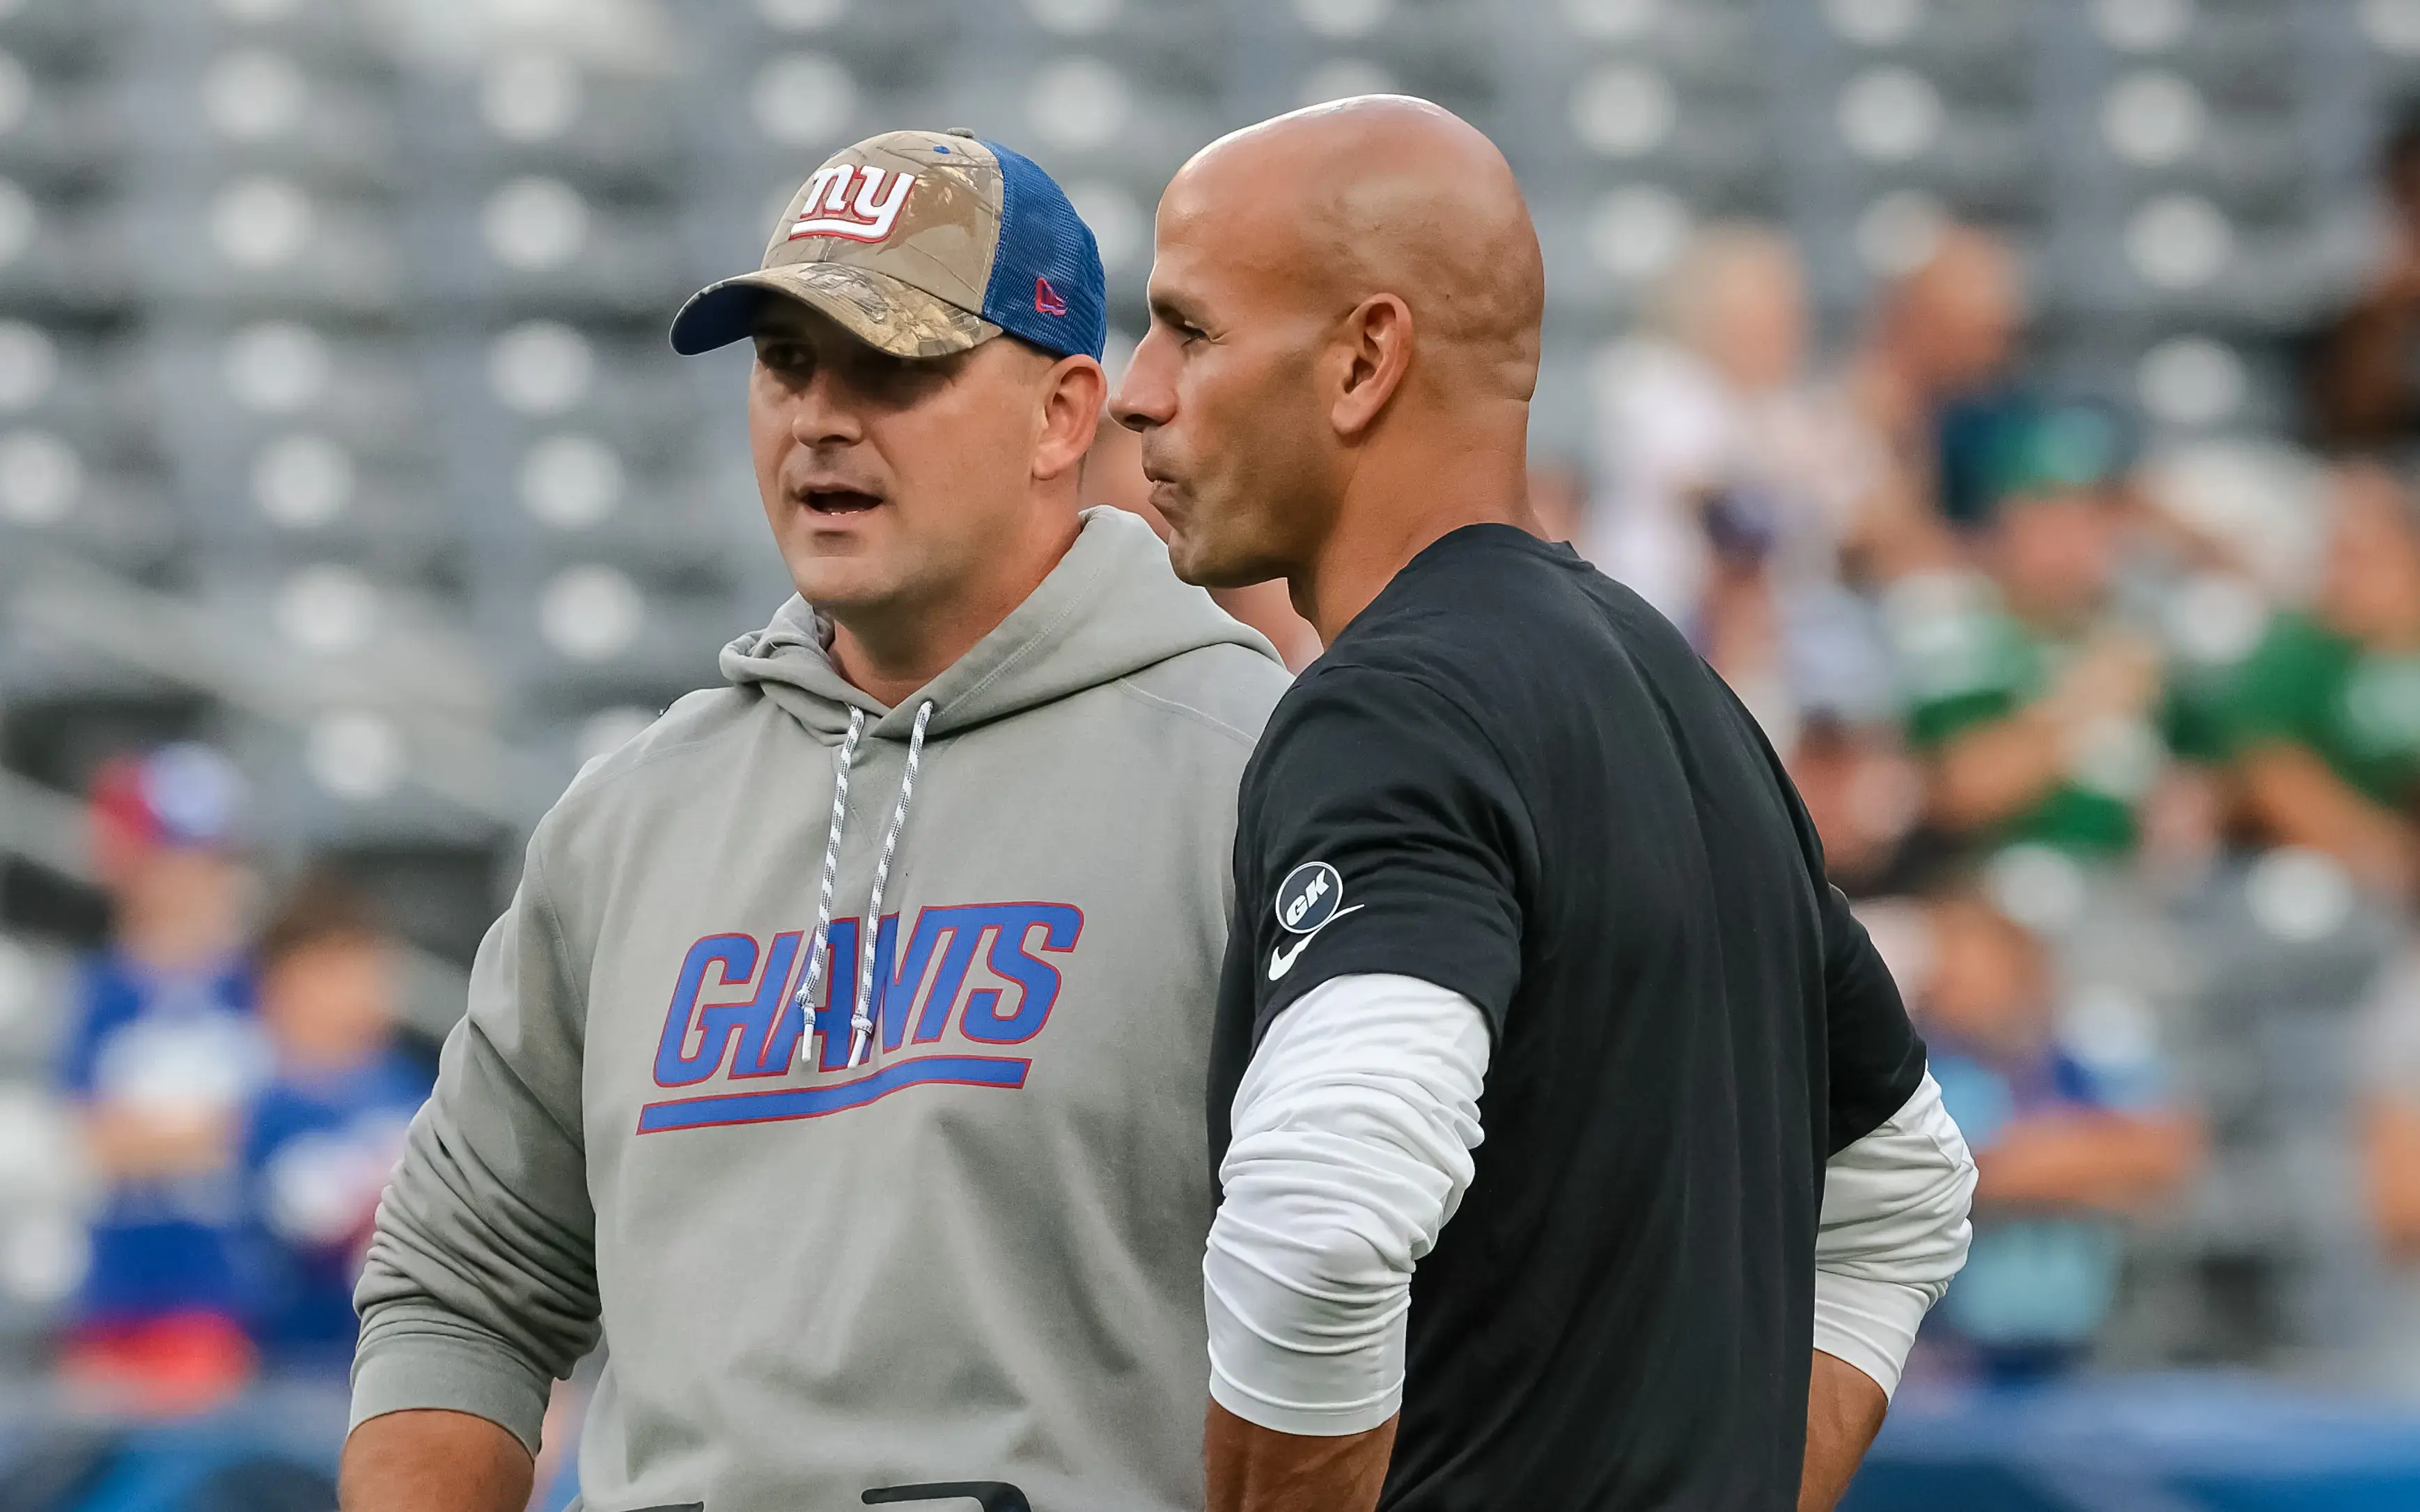 Aug 14, 2021; East Rutherford, New Jersey, USA; New York Giants head coach Joe Judge (left) talks with New York Jets head coach Robert Saleh before a game at MetLife Stadium. Mandatory Credit: Vincent Carchietta-USA TODAY Sports / © Vincent Carchietta-USA TODAY Sports